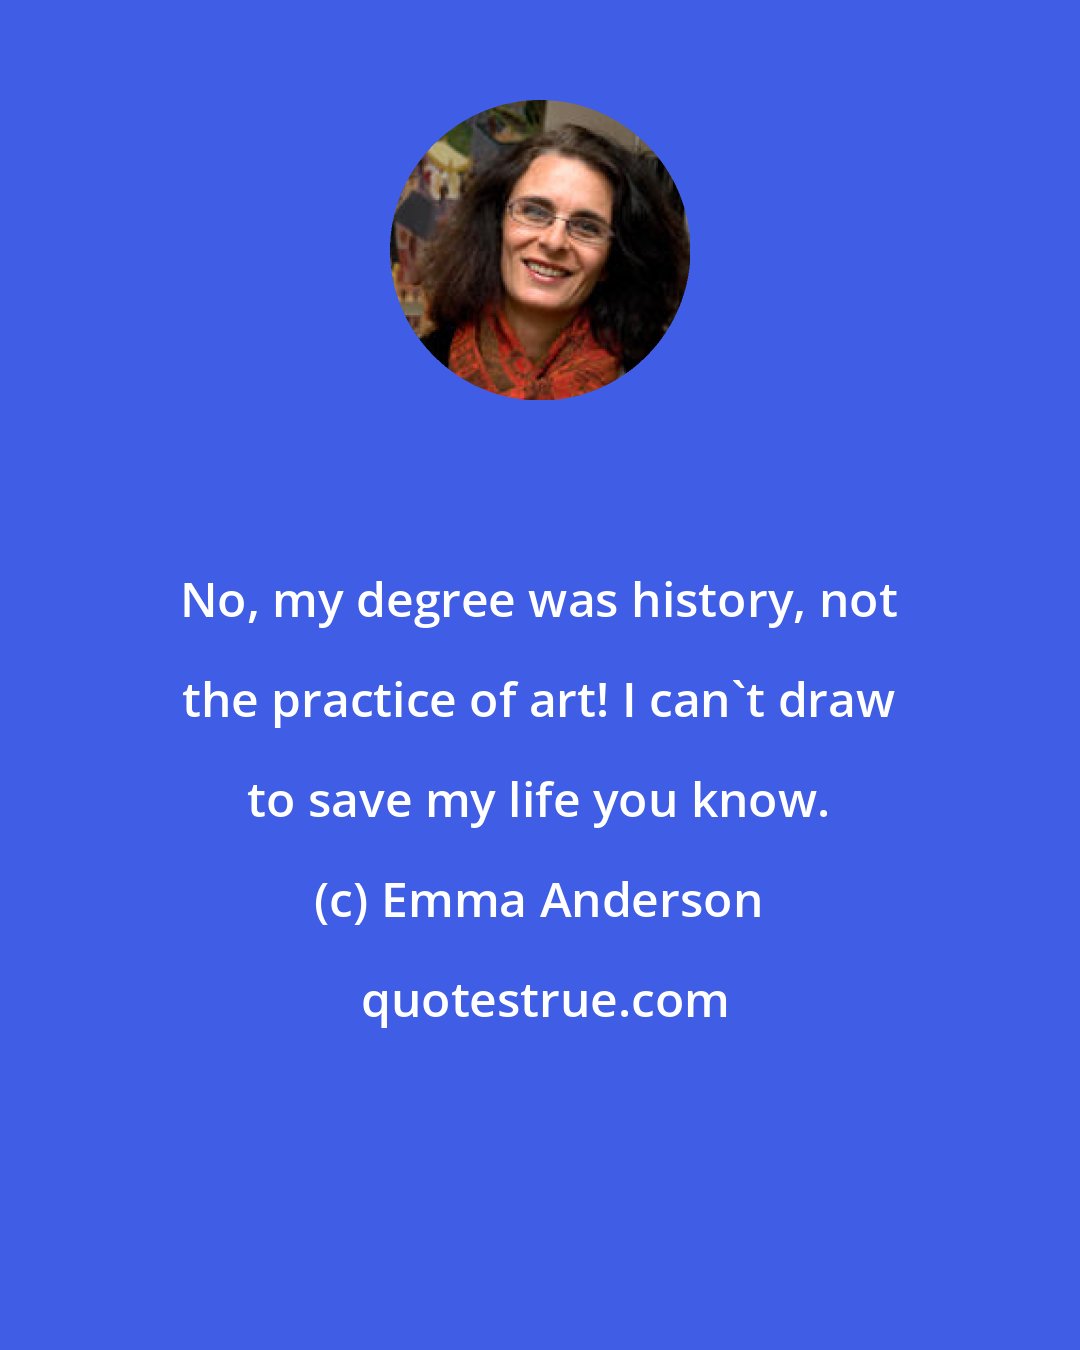 Emma Anderson: No, my degree was history, not the practice of art! I can't draw to save my life you know.